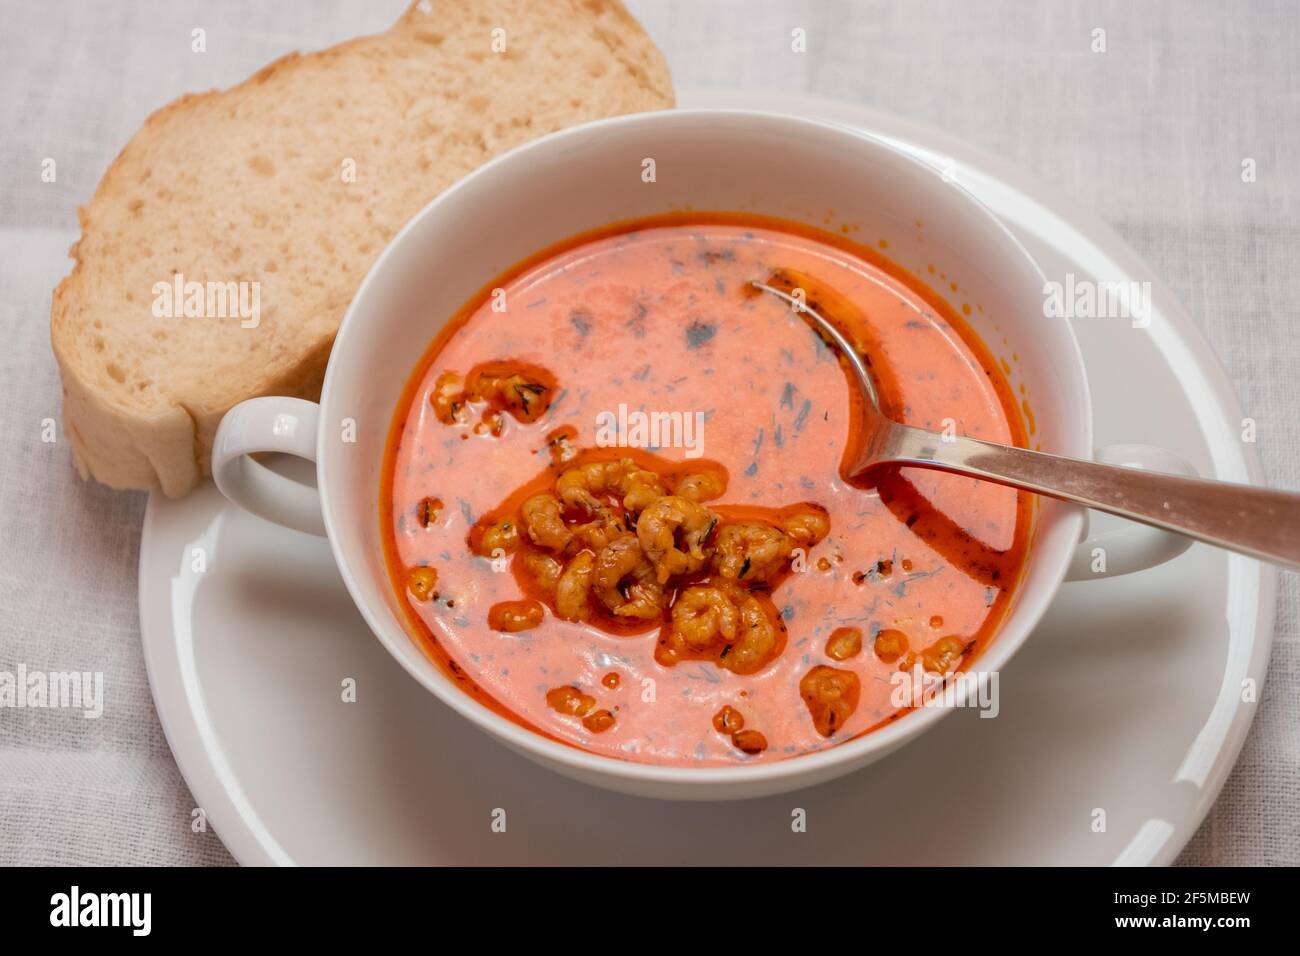 Busumer Krabbensuppe, Busom Style Soup with North Sea Crabs in a White Bowl, Served with a Slice of Bread Stock Photo